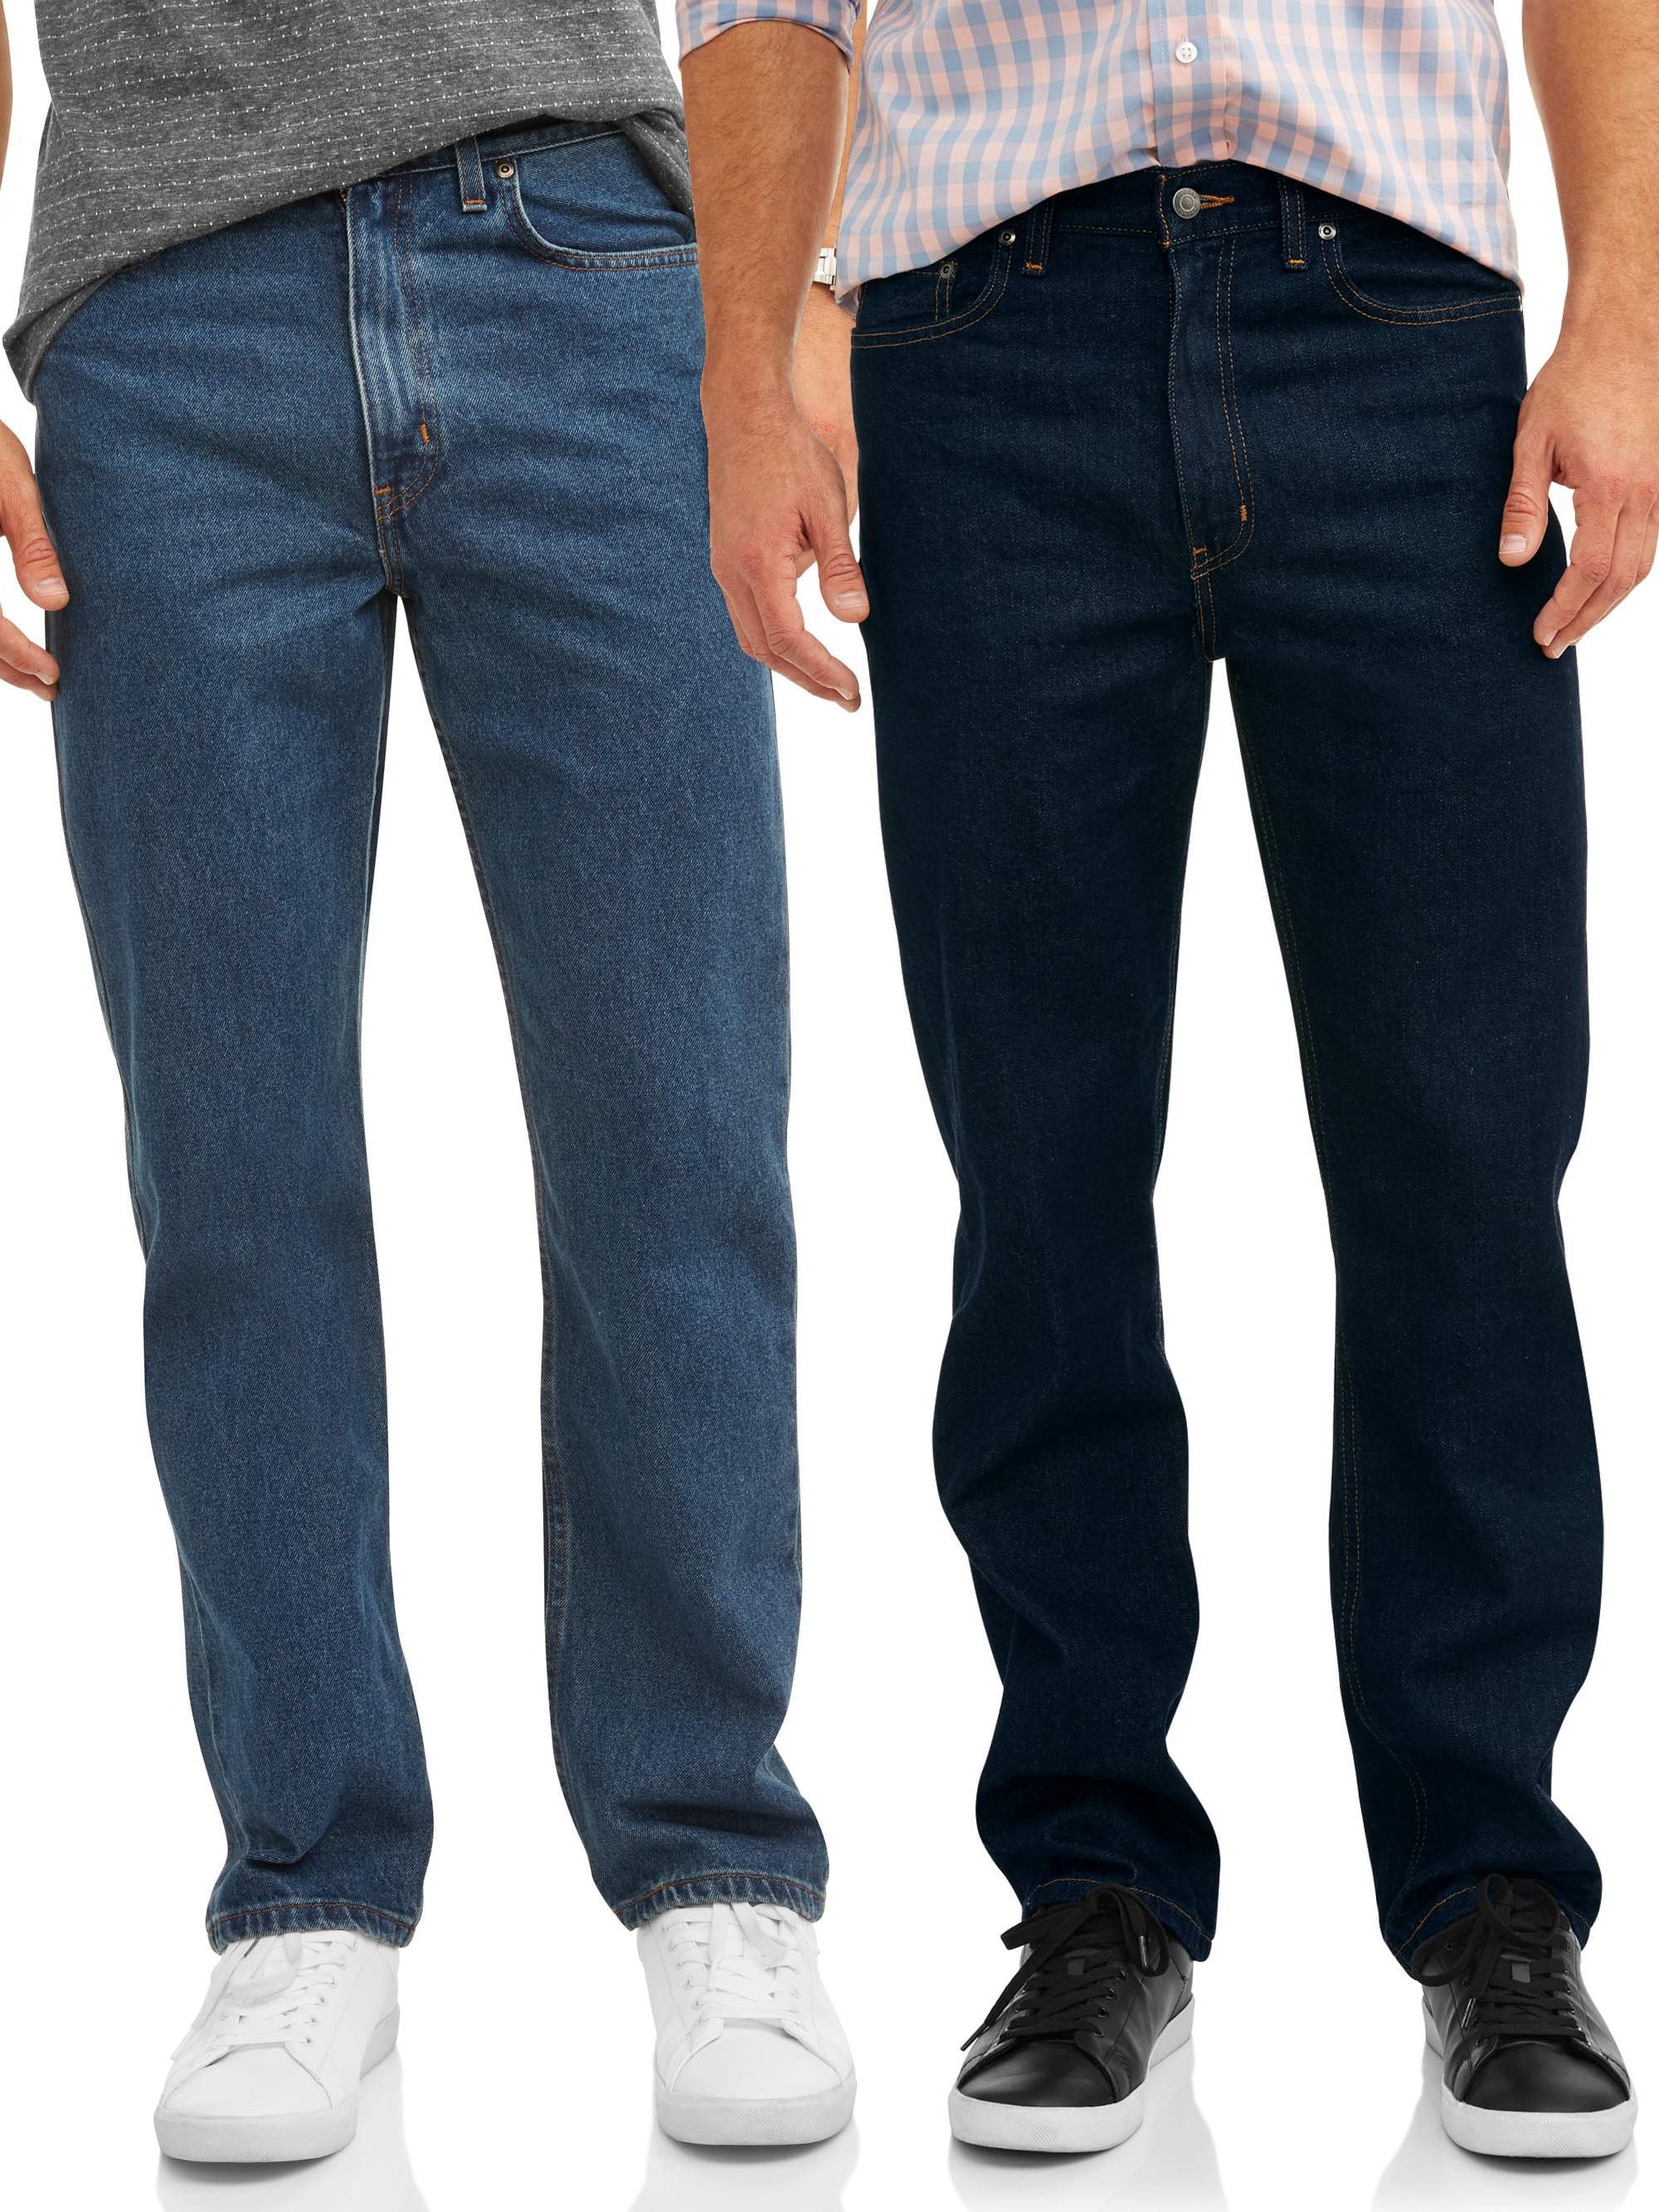 George Men's 100% Cotton Relaxed Fit Jeans, 2-Pack - Walmart.com